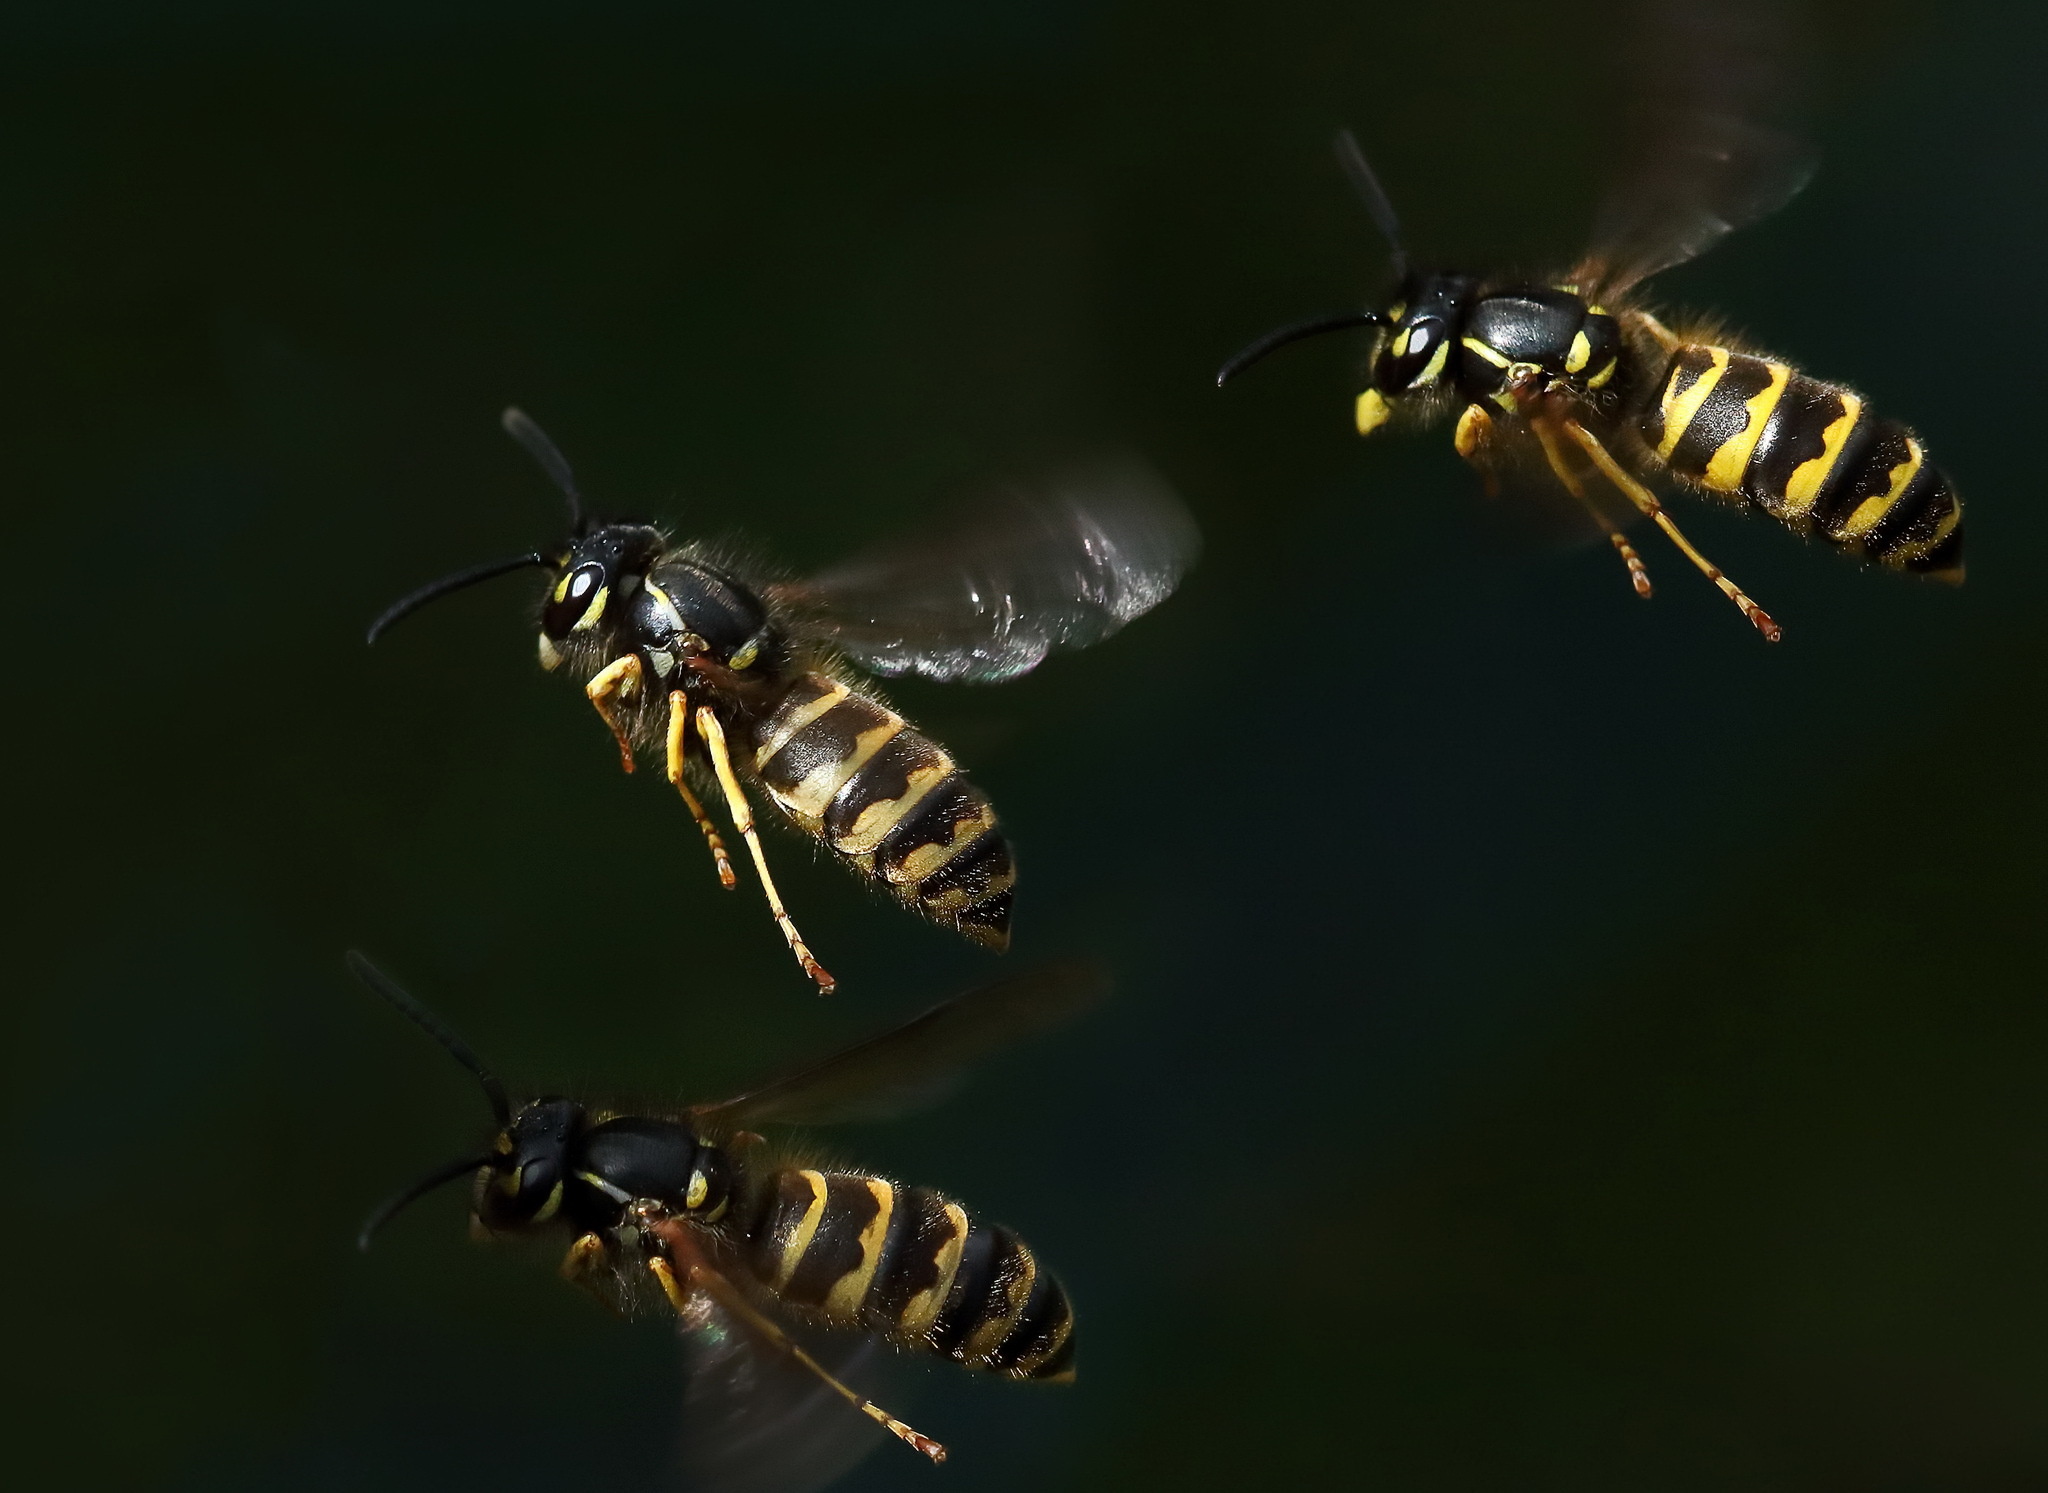 Wasp wallpapers, Insect beauty, Nature's tiny warriors, 4K resolution, 2050x1500 HD Desktop